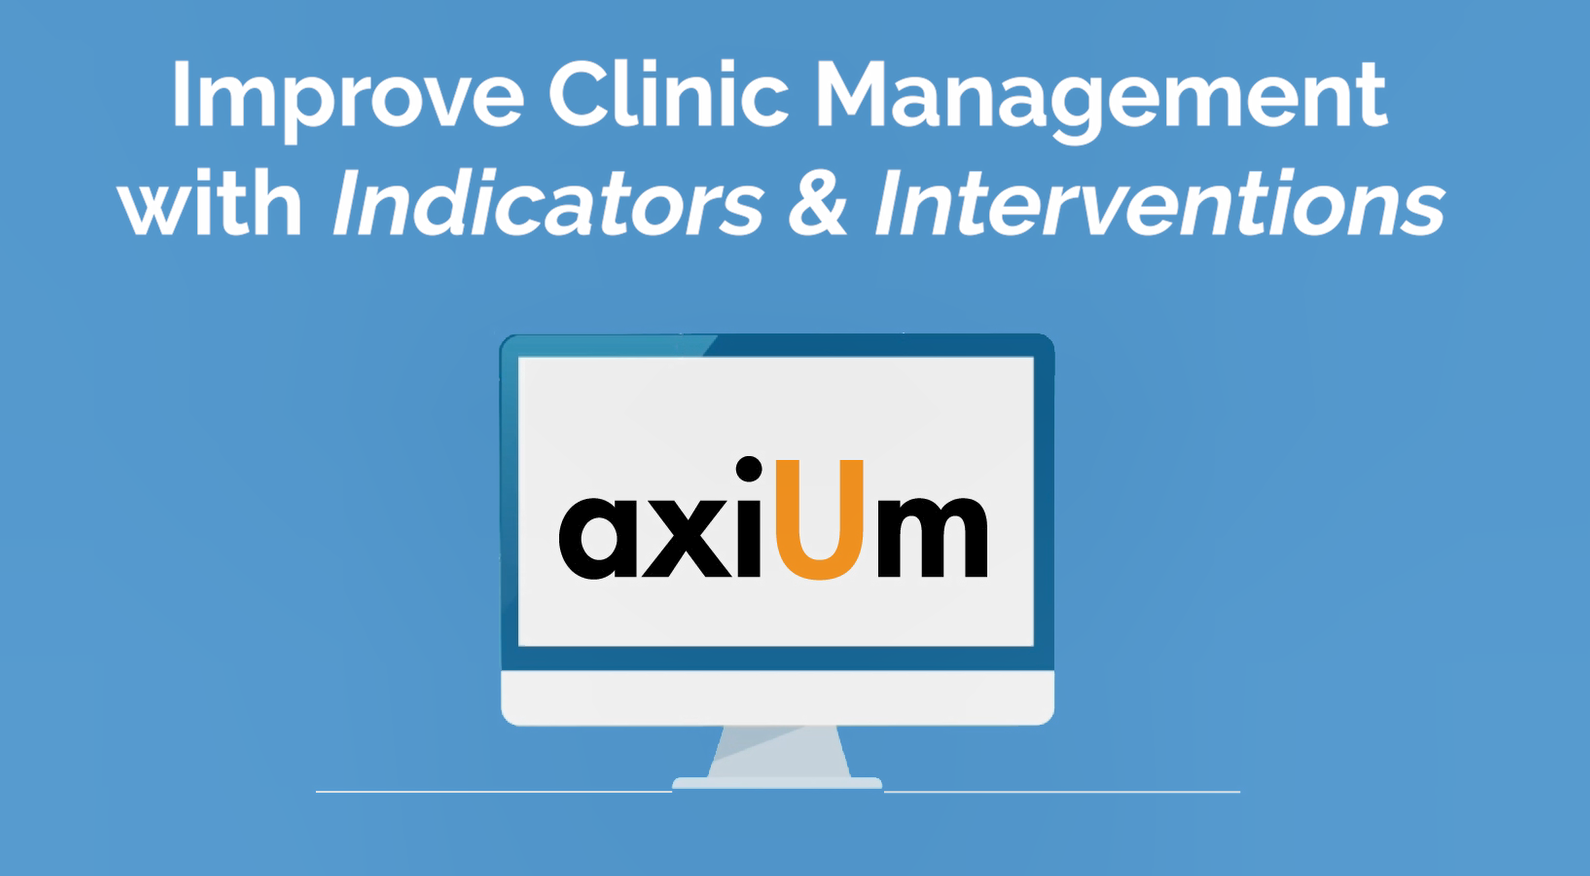 Educational Video – Improve Clinic Management with Indicators & Interventions